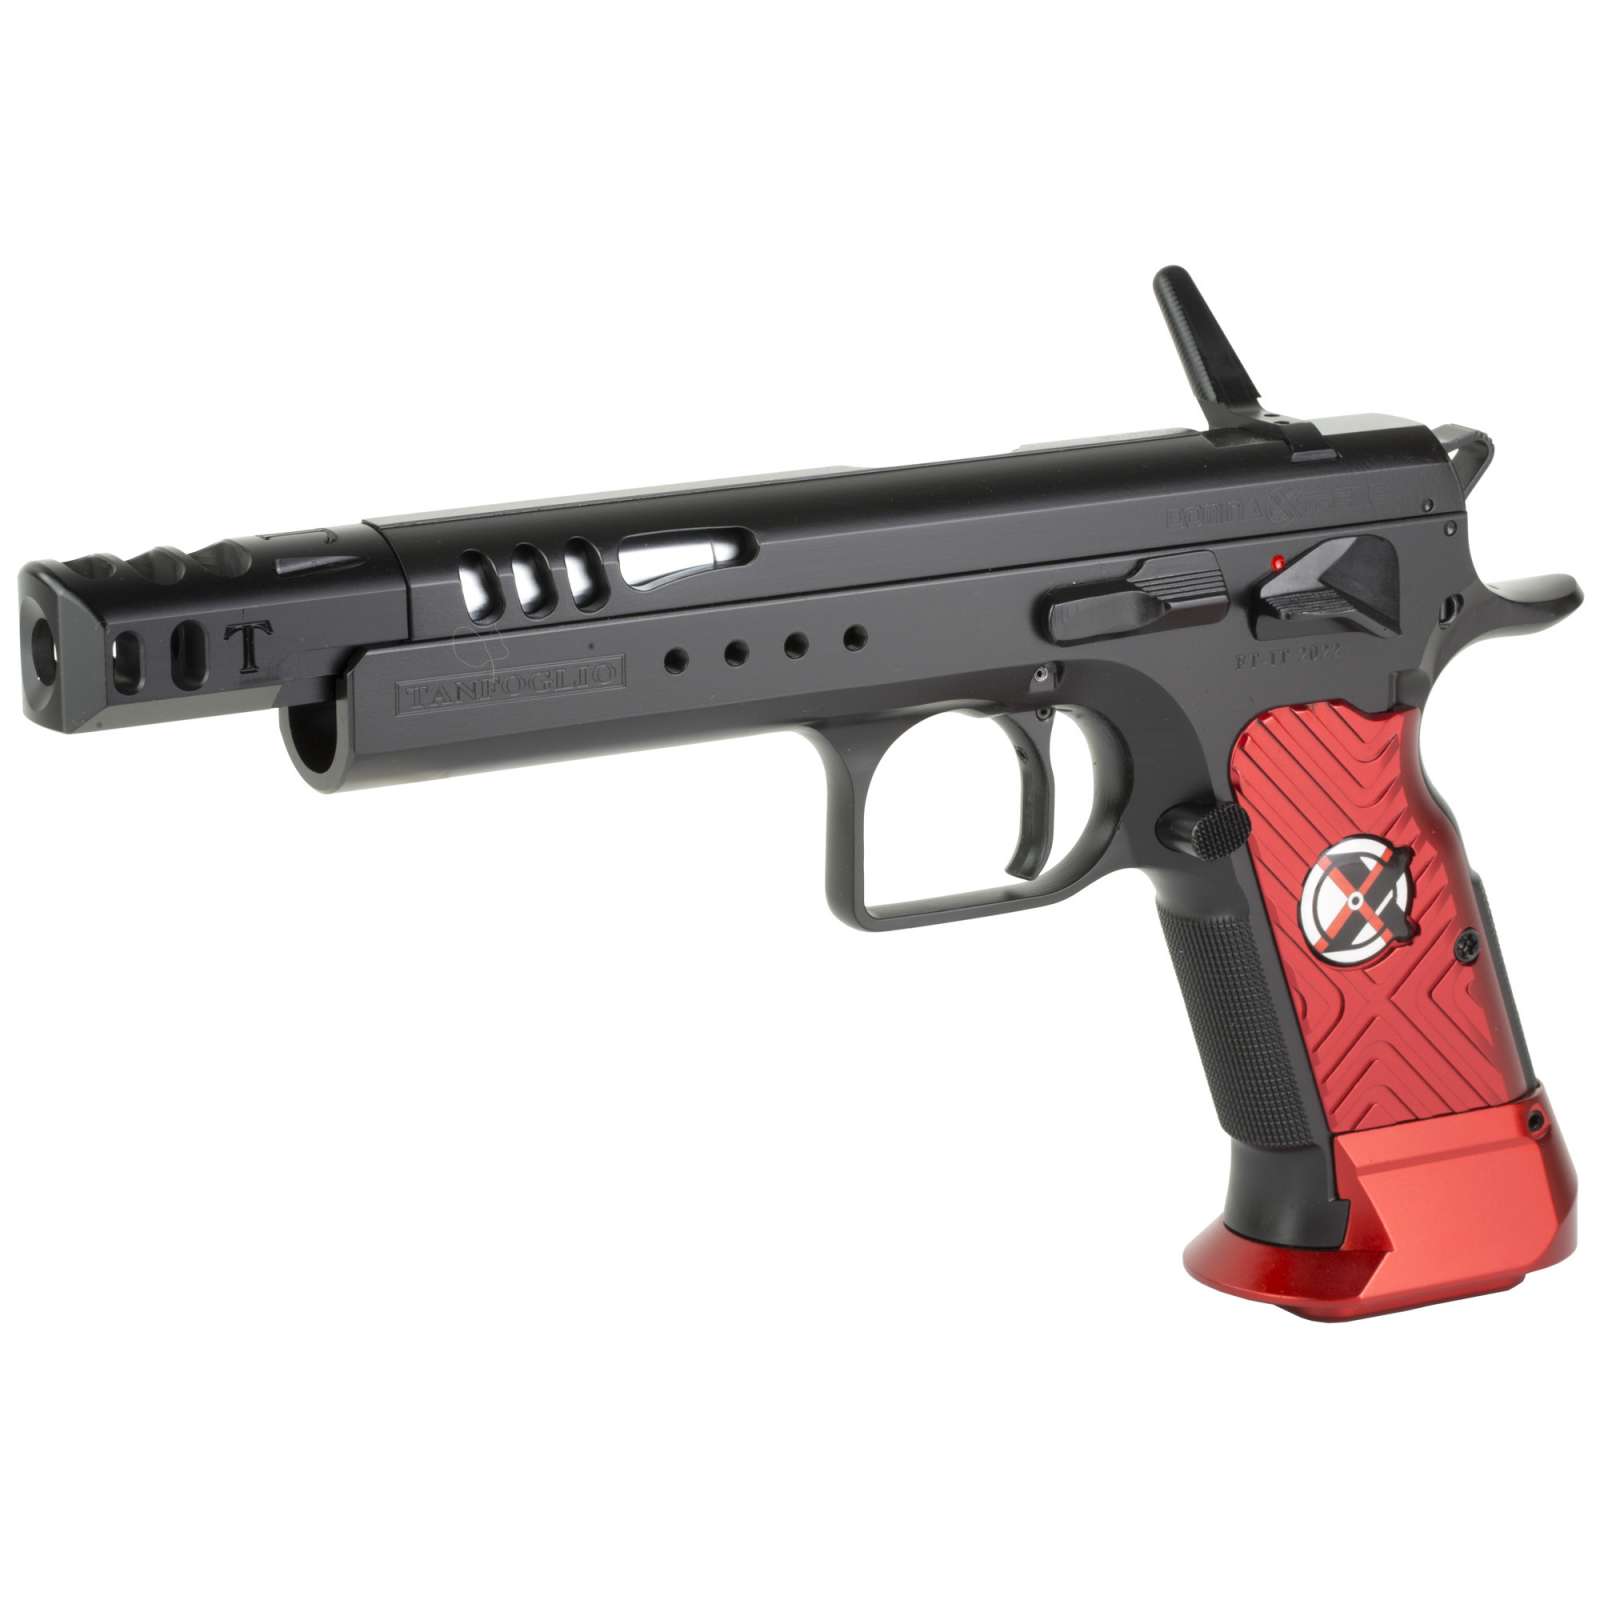 Tanfoglio Domina Xtreme IFG 9MM 5.2" 19+1 Red Grips TF-DOMX-9-img-2